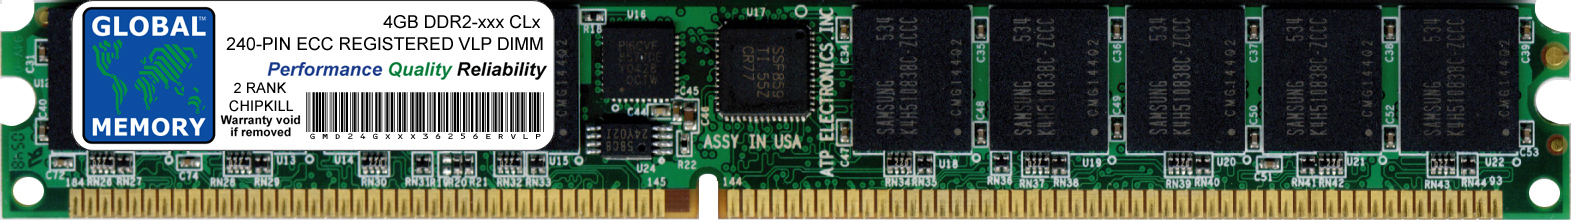 4GB DDR2 400/533/667MHz 240-PIN ECC REGISTERED VLP DIMM (VLP RDIMM) MEMORY RAM FOR SERVERS/WORKSTATIONS/MOTHERBOARDS (2 RANK CHIPKILL)